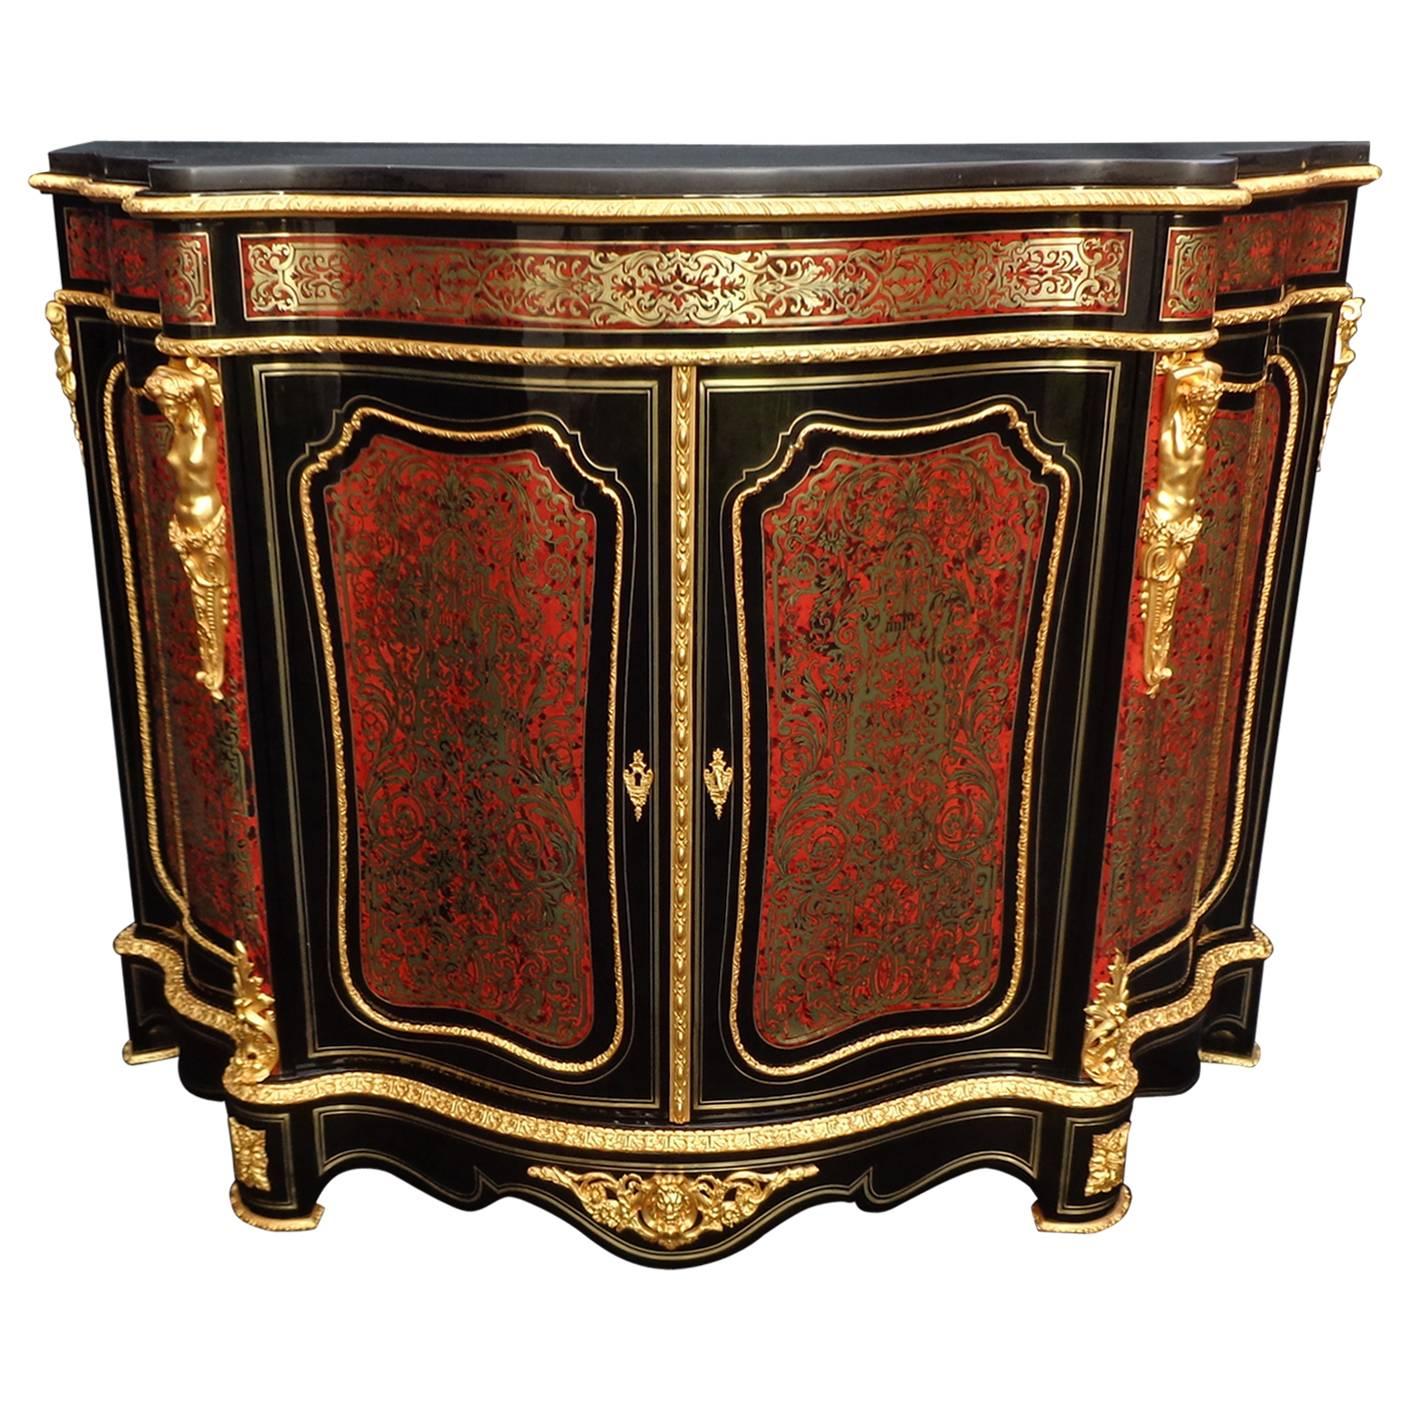 Furniture in Boulle Marquetry Stamped "F. Roux" Napoleon III Period 19th Century For Sale